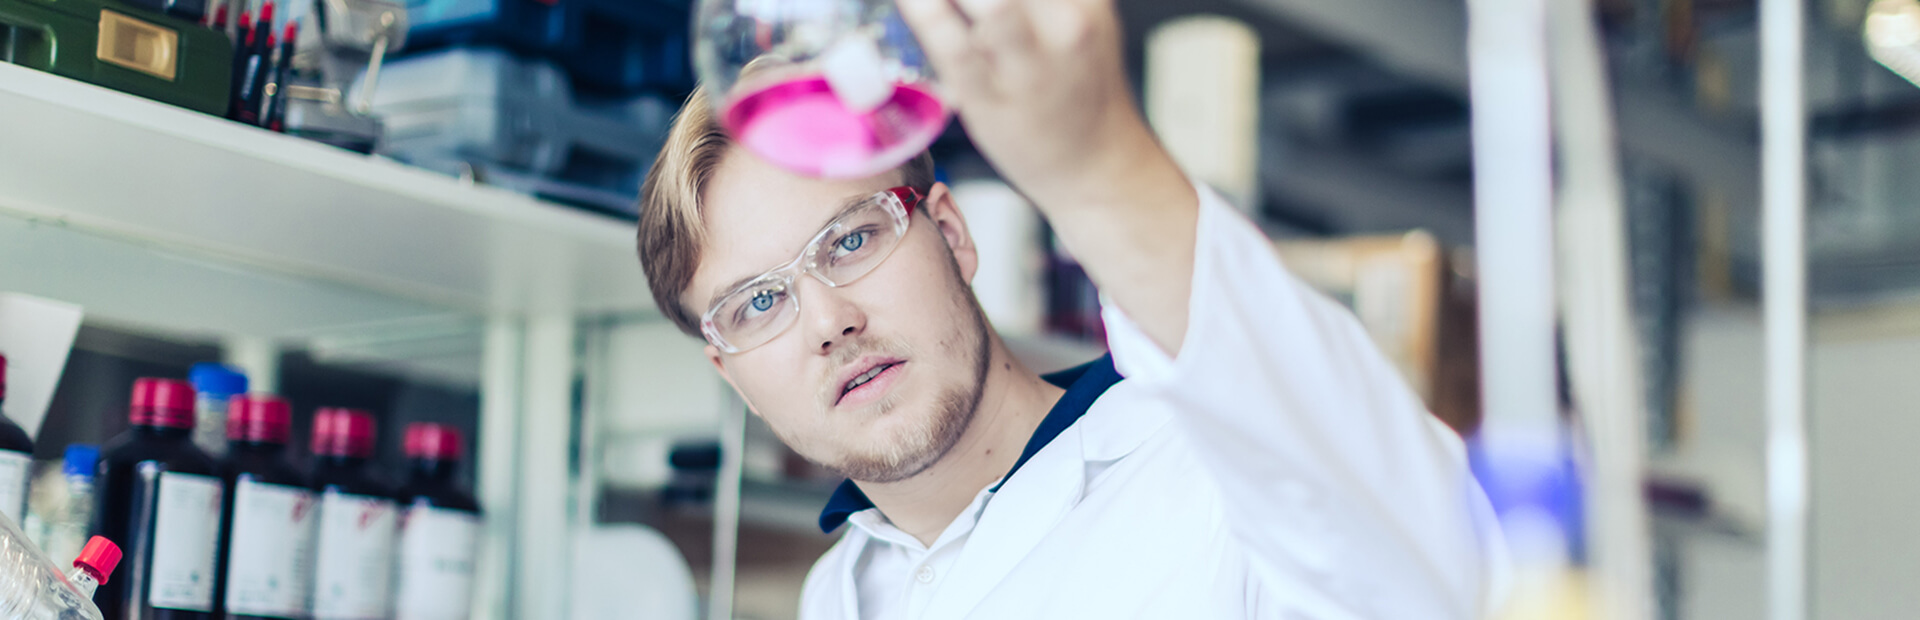 Find out more about our bachelor degree programme in Applied Chemistry.